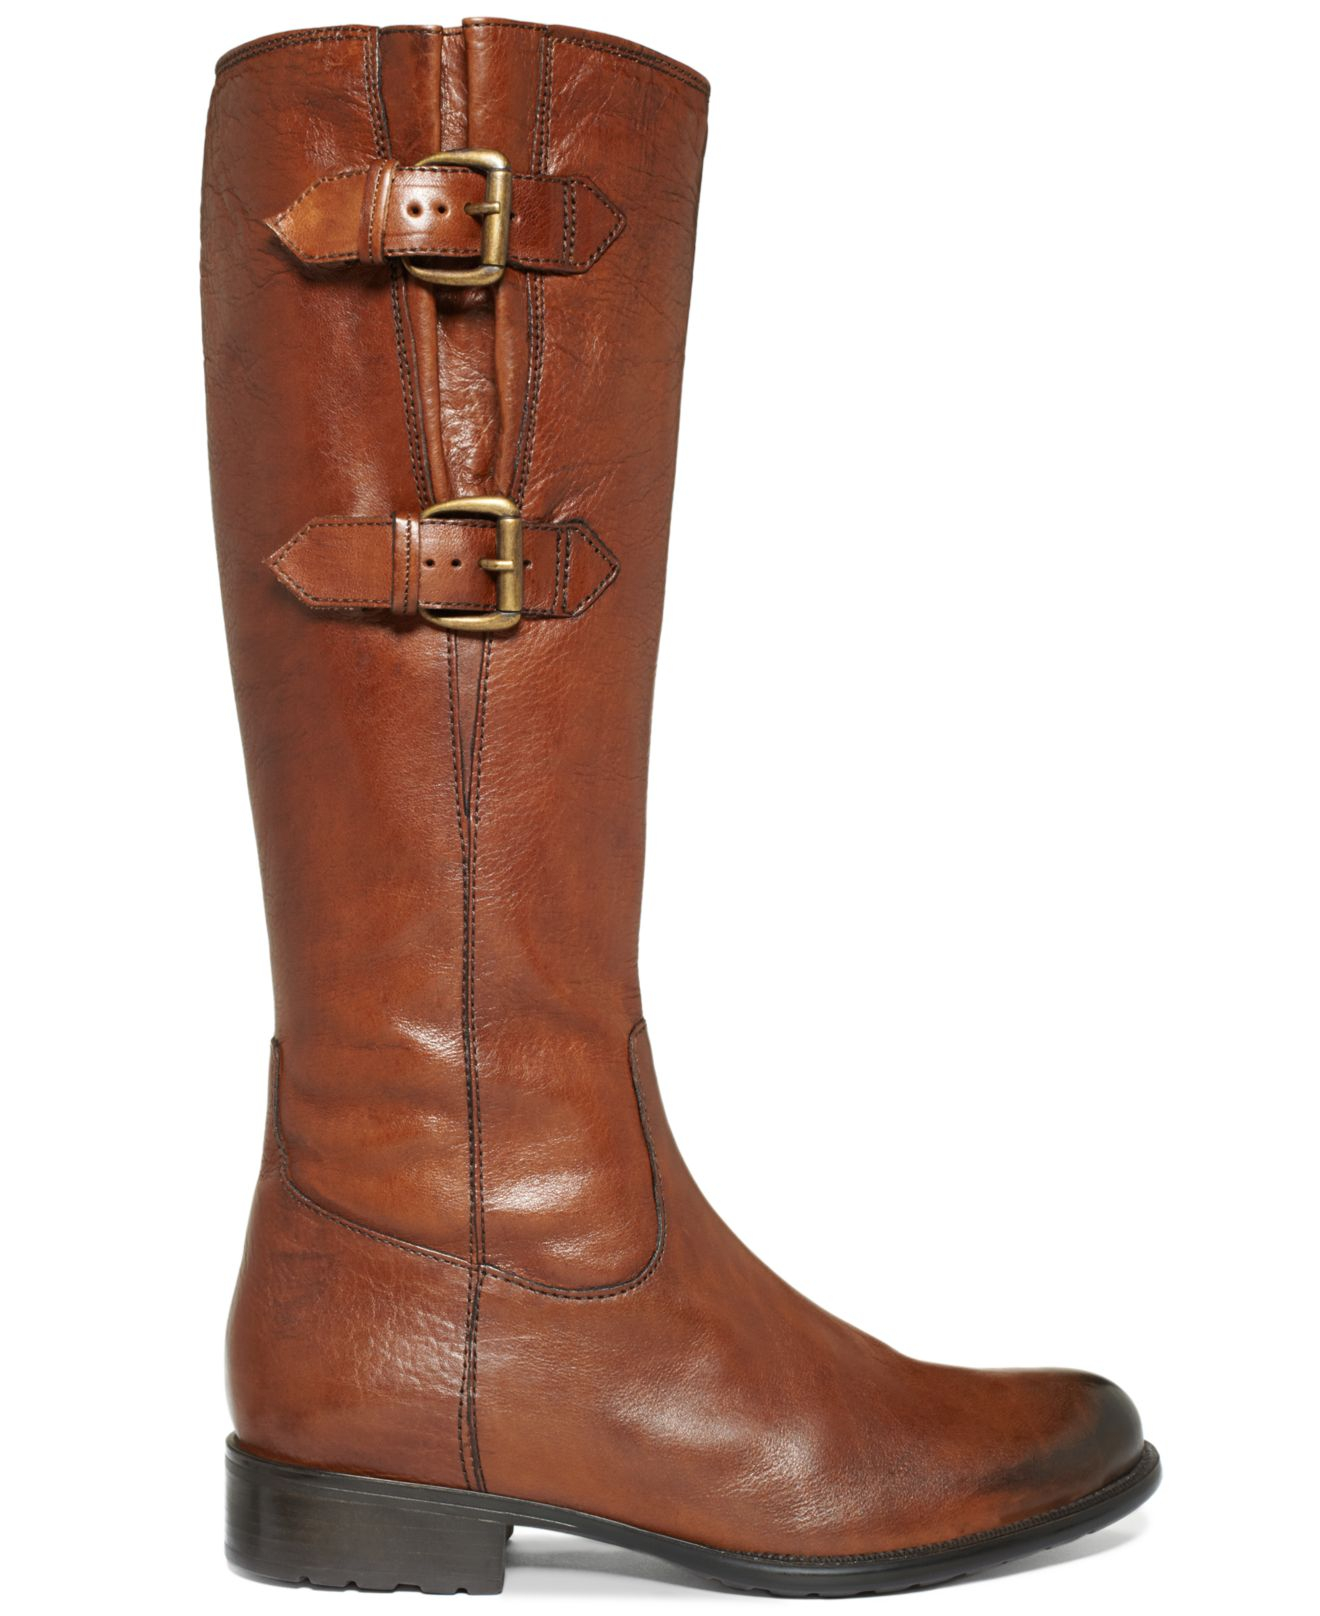 Mullin Spice Tall Riding Boots in Tan 